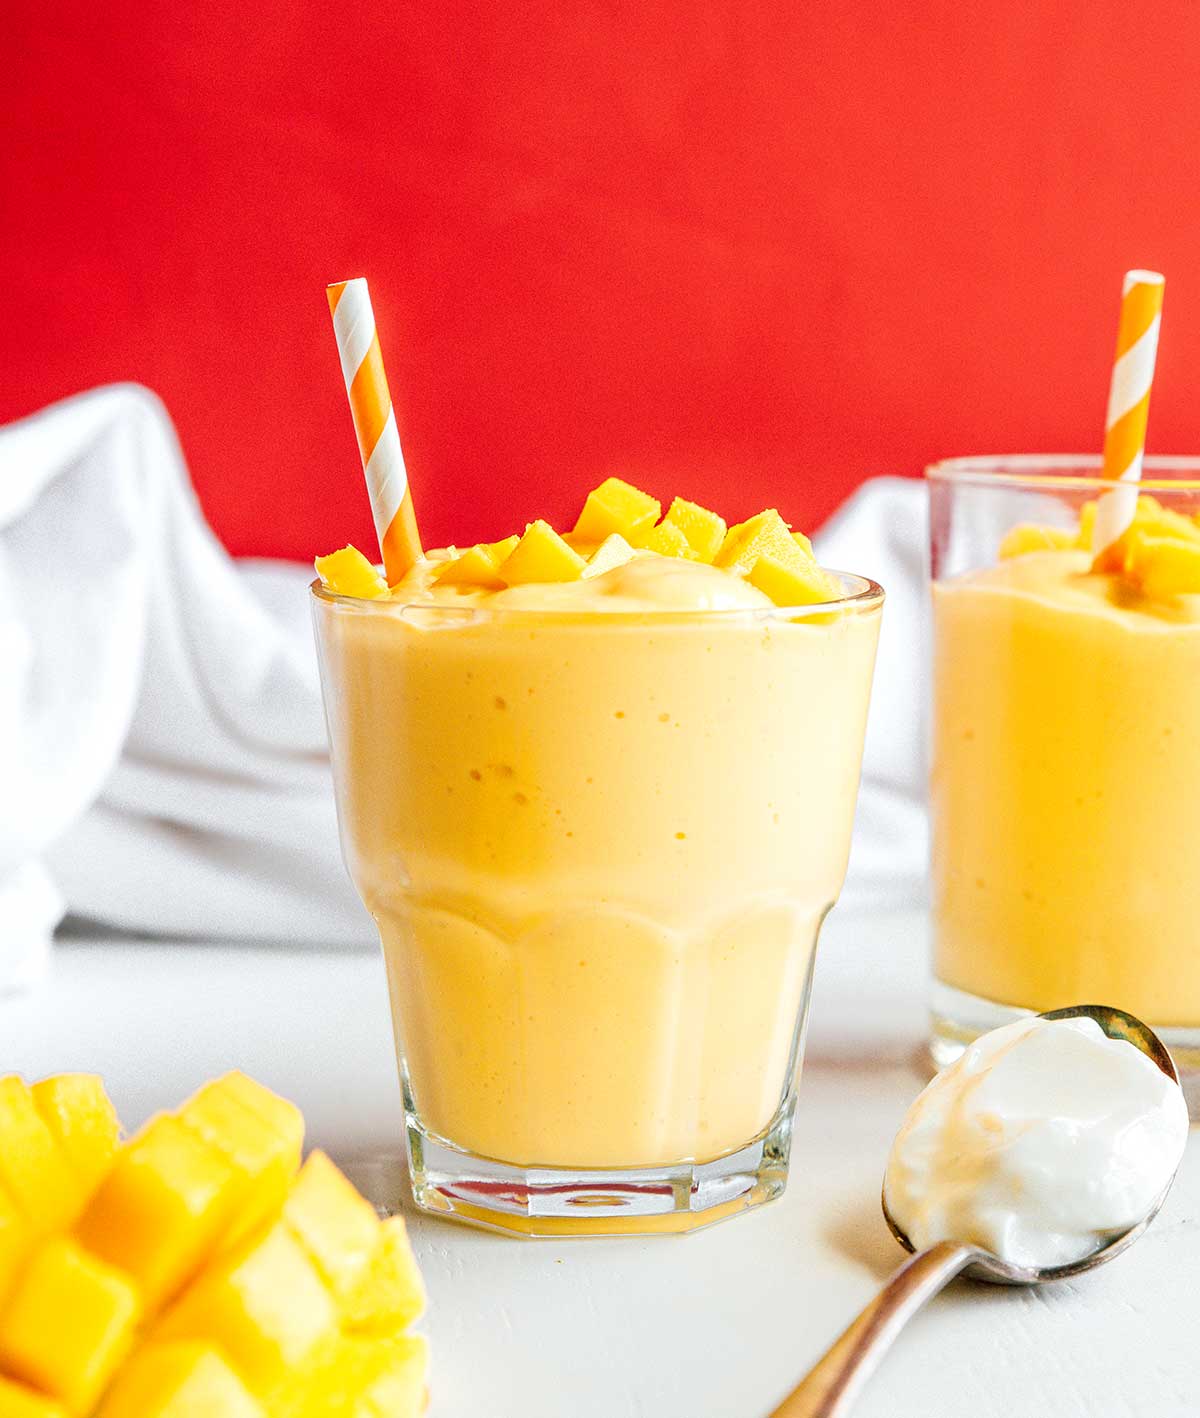 A glass filled with mango smoothie and topped with diced mangos